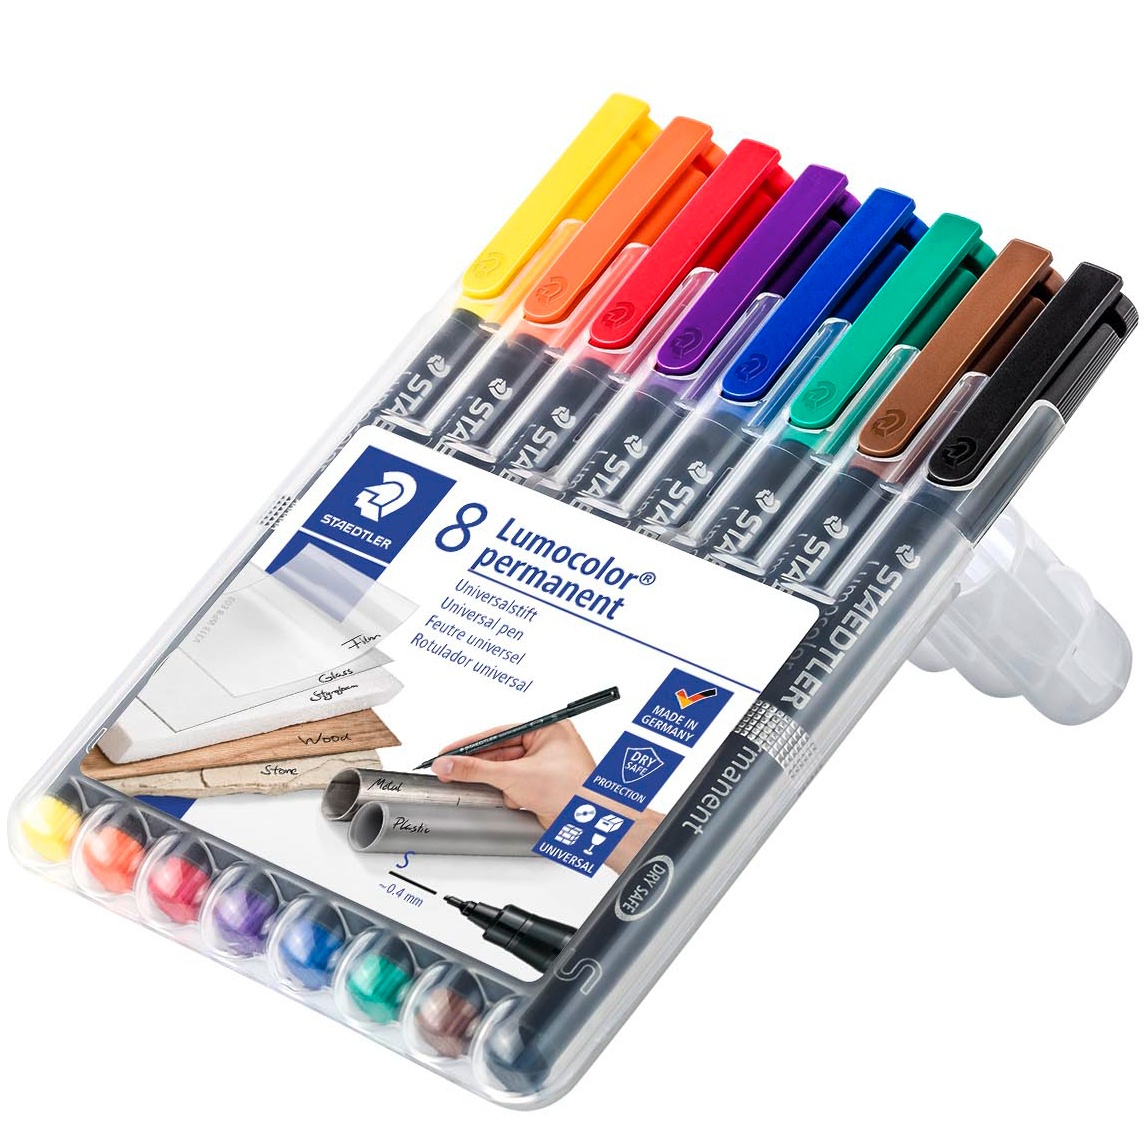 STAEDTLER 312 WP4 Lumocolor Non Permanent Broad Universal Markers Pack of 4. 